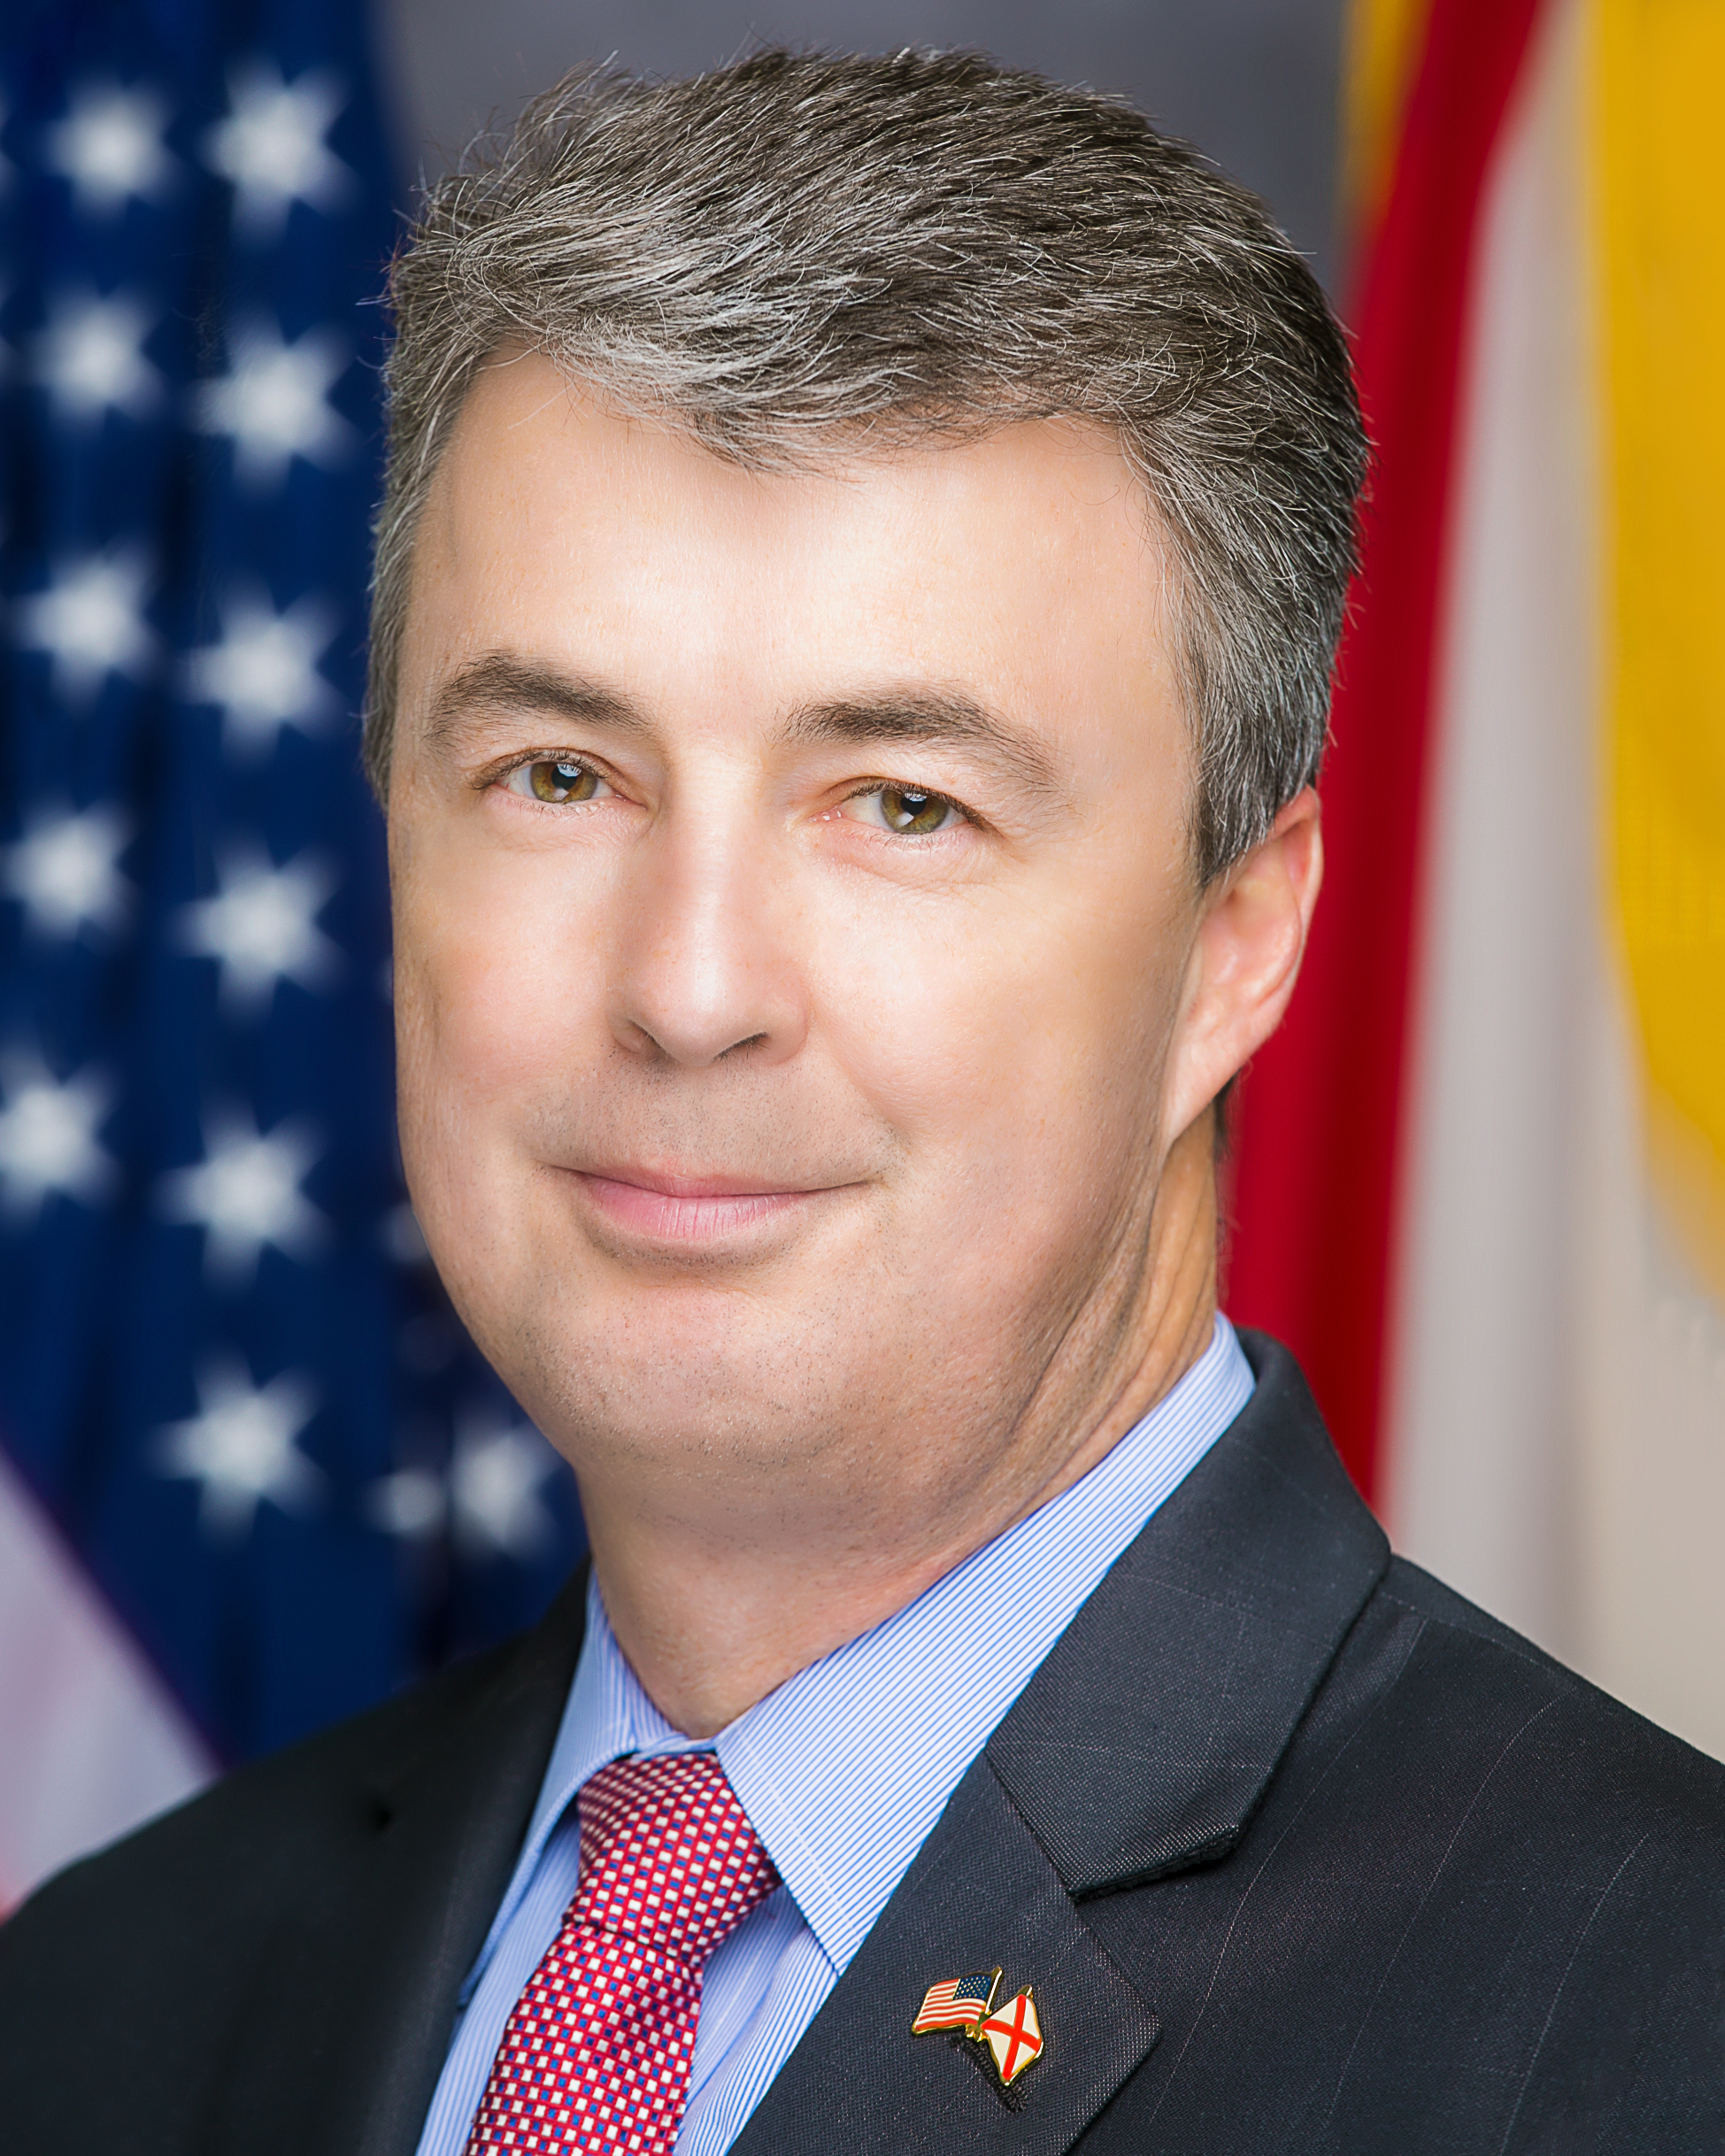 Attorney General Steve Marshall praises house bill intended to reform Alabama Board of Pardons and Paroles